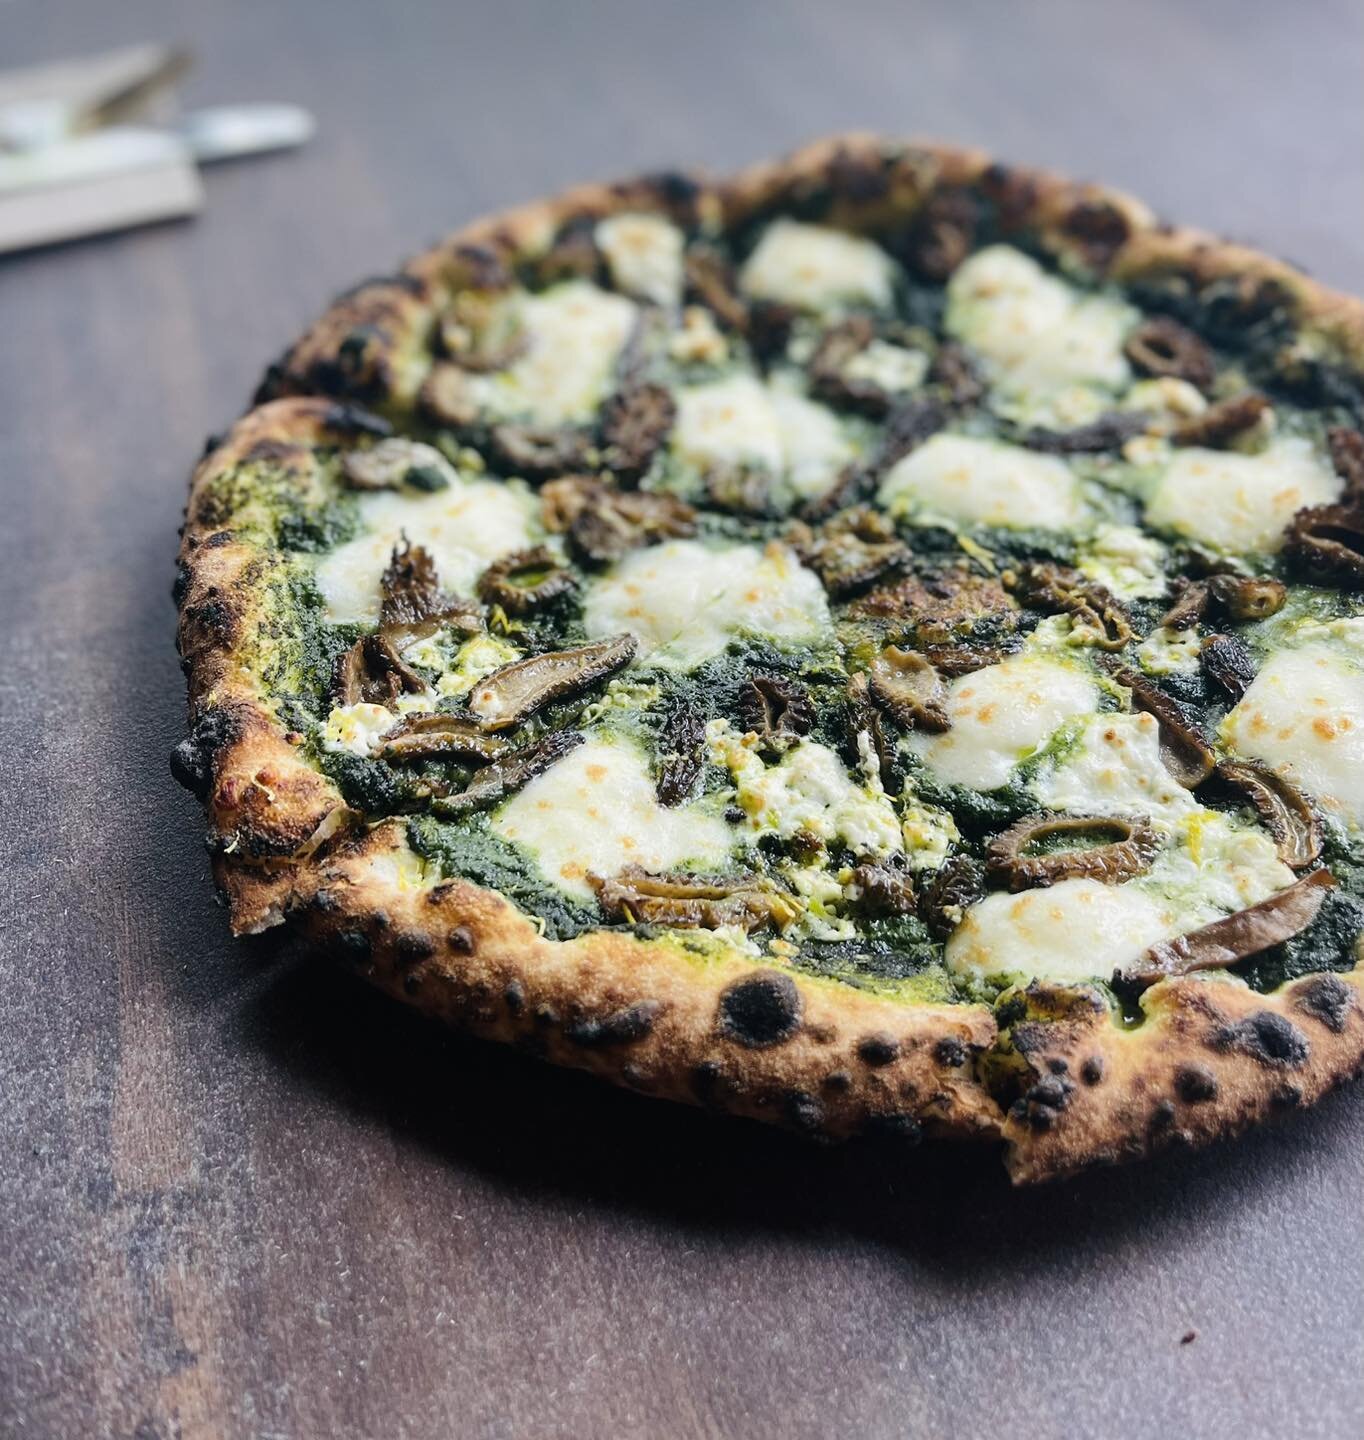 We&rsquo;ve got a few more morels to keep this delicious pizza special going for another day or two! 

House-made wild nettle pesto, locally foraged morel mushrooms, feta, fresh mozzarella &amp; lemon zest.

#woodfired #gorgeinspired #solsticepizza #